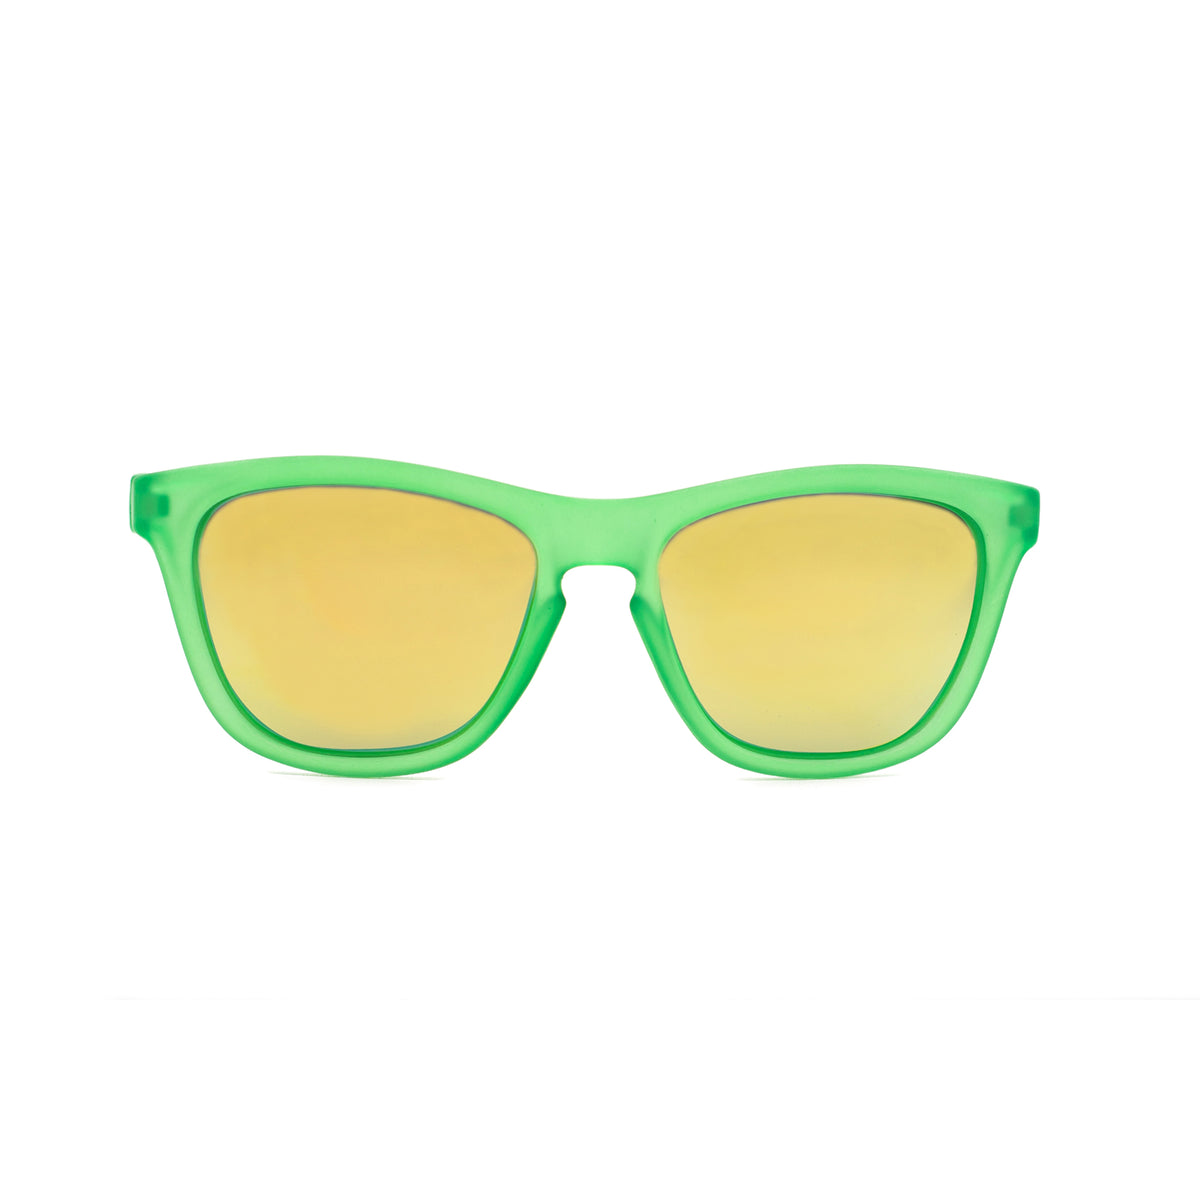 Front view of Sunnies green polarized kids sunglasses